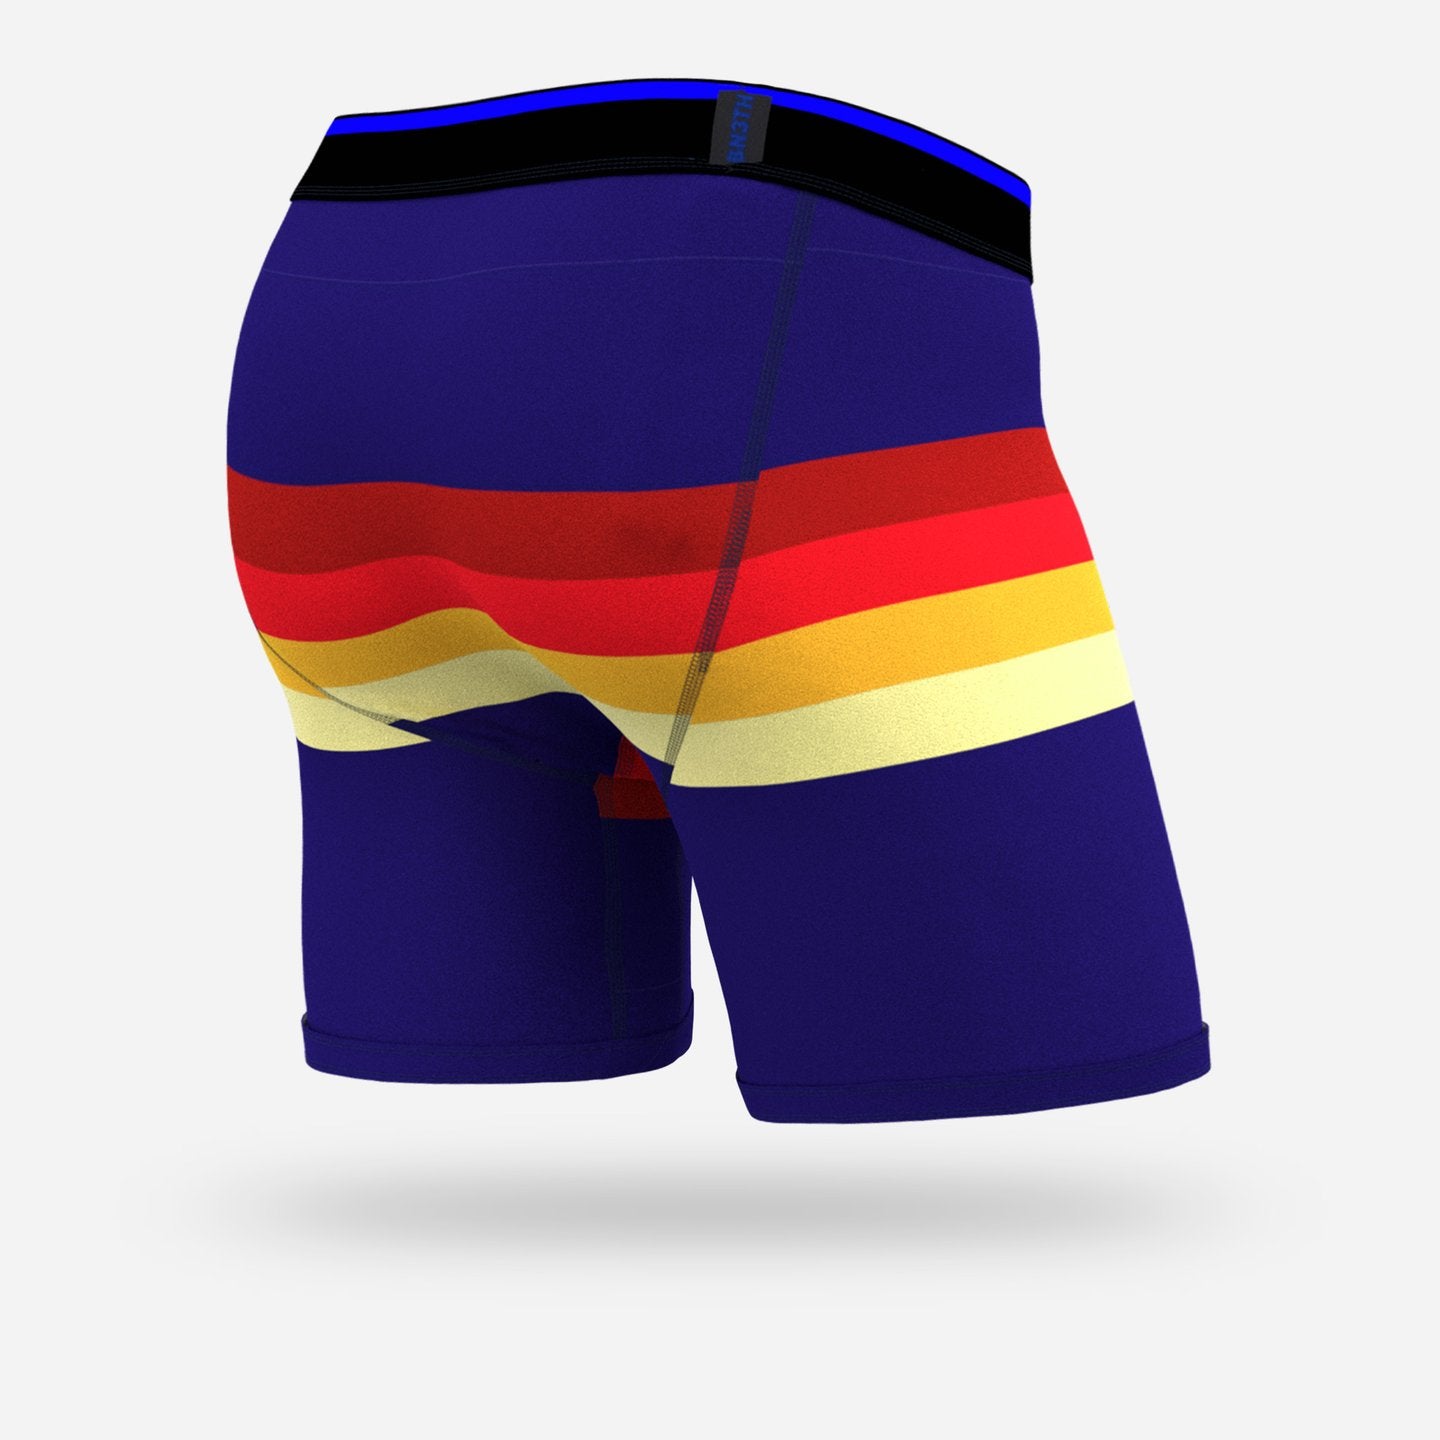 BN3TH MEN'S BOXER WITH RETRO STRIPES OPENING